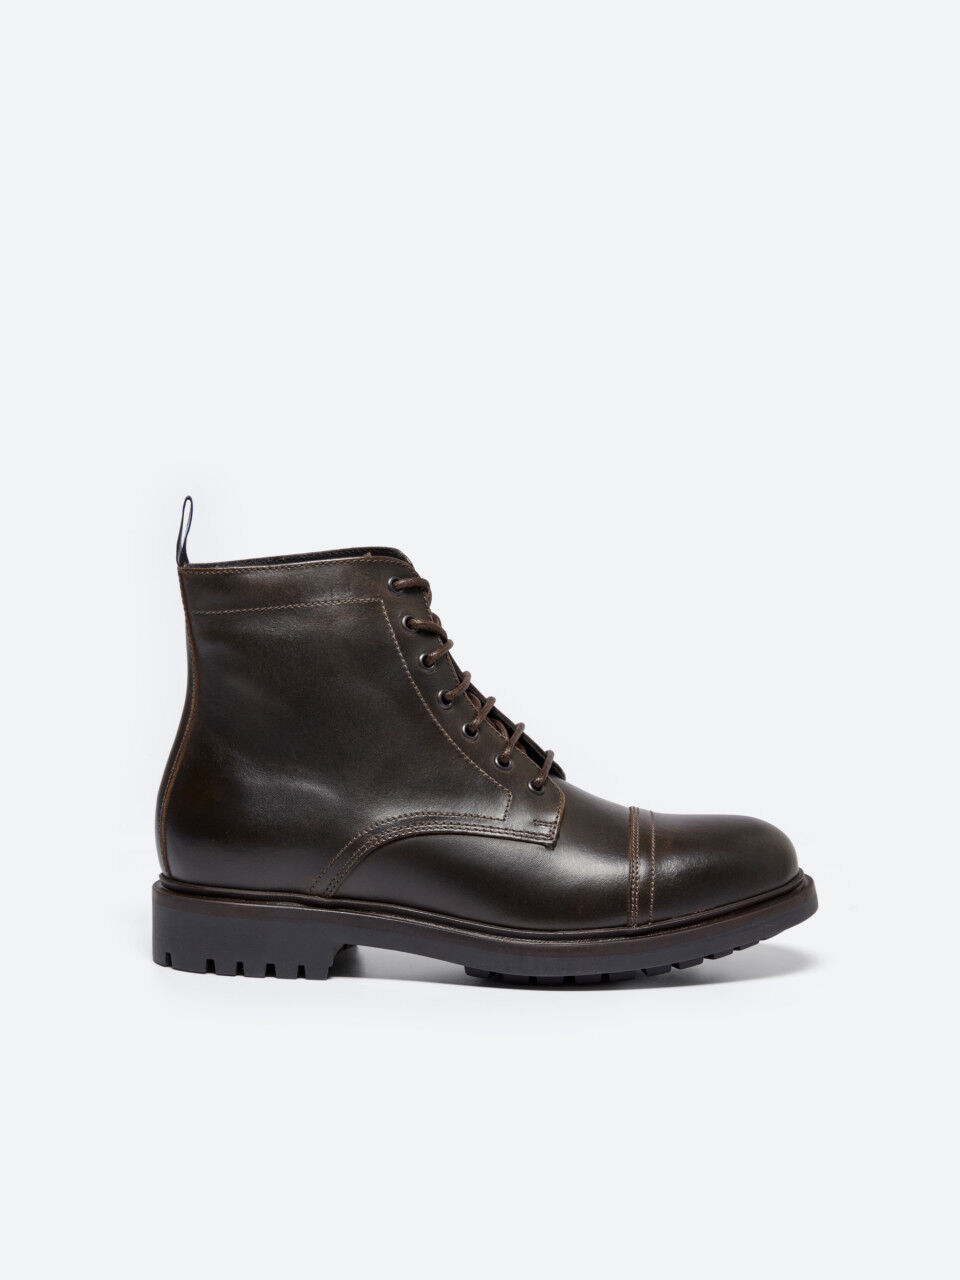 Heavy-duty boots in 100% leather